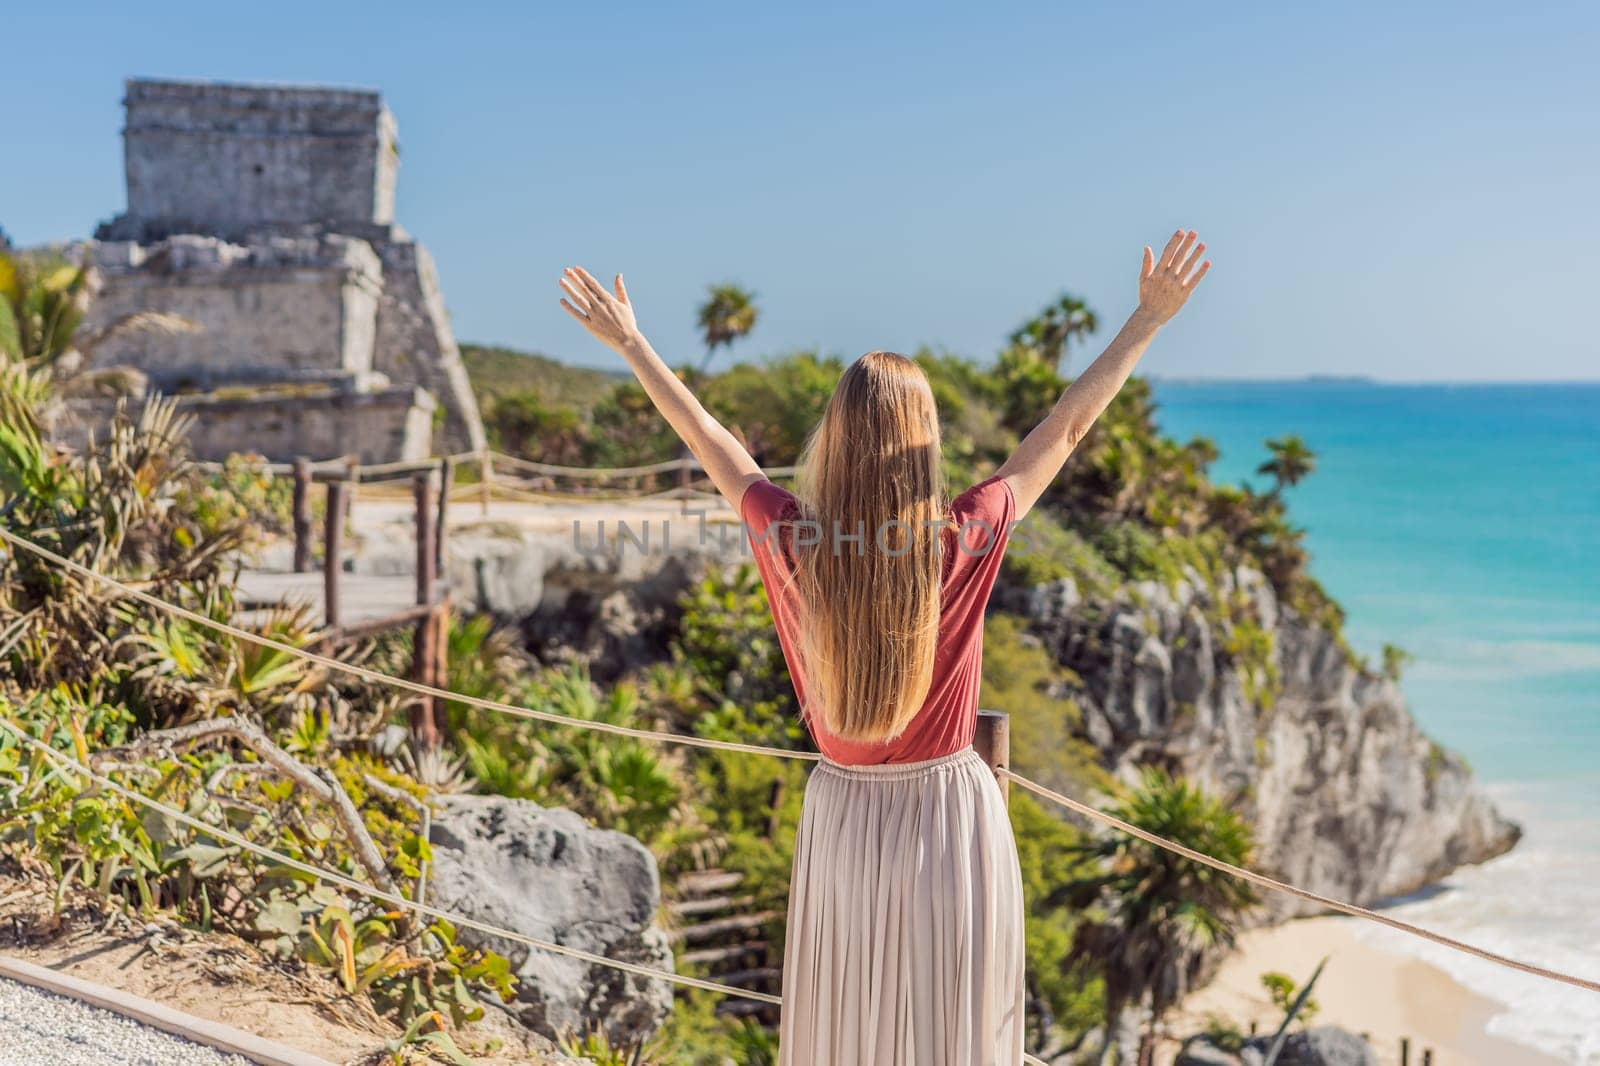 Woman tourist enjoying the view Pre-Columbian Mayan walled city of Tulum, Quintana Roo, Mexico, North America, Tulum, Mexico. El Castillo - castle the Mayan city of Tulum main temple.